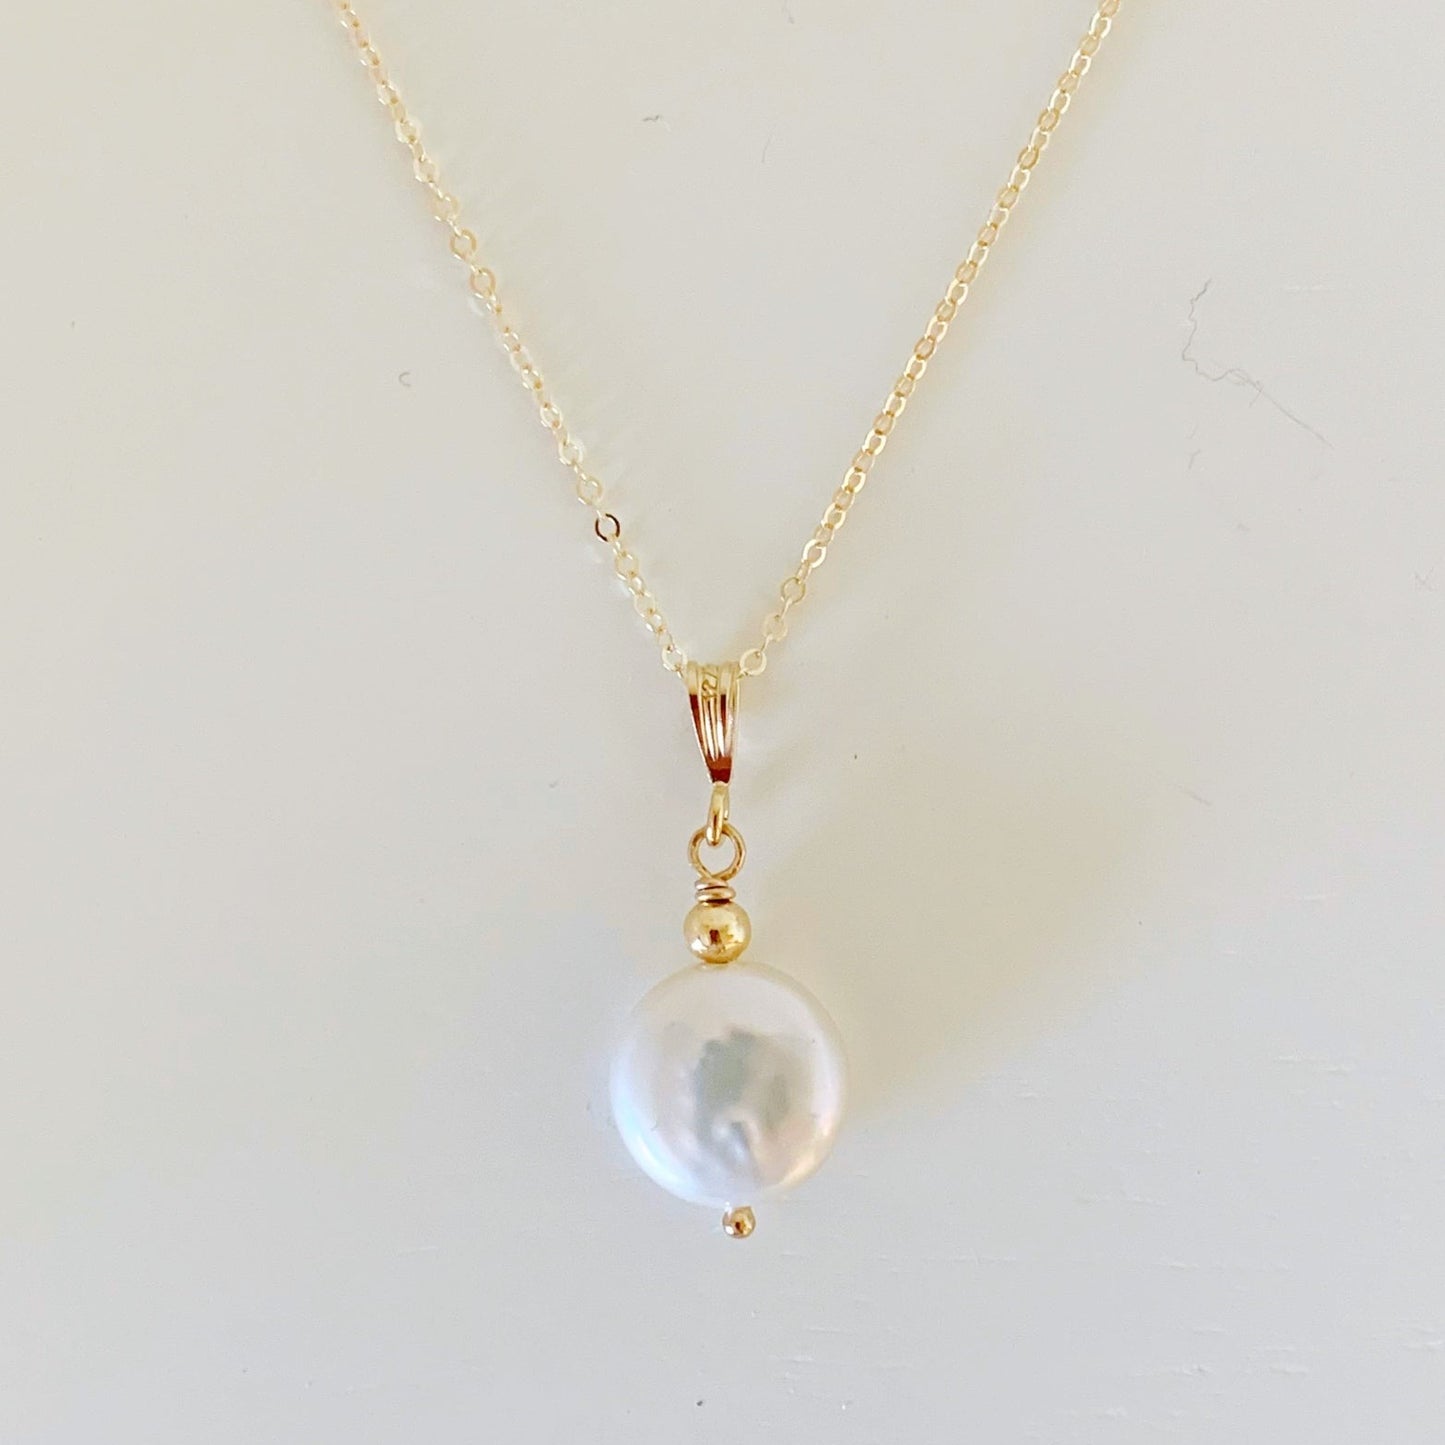 the newport pendant by mermaids and madeleines is a simple style designed with a white freshwater coin pearl with 14k gold filled chain and findings. this necklace is photographed flat on a white surface